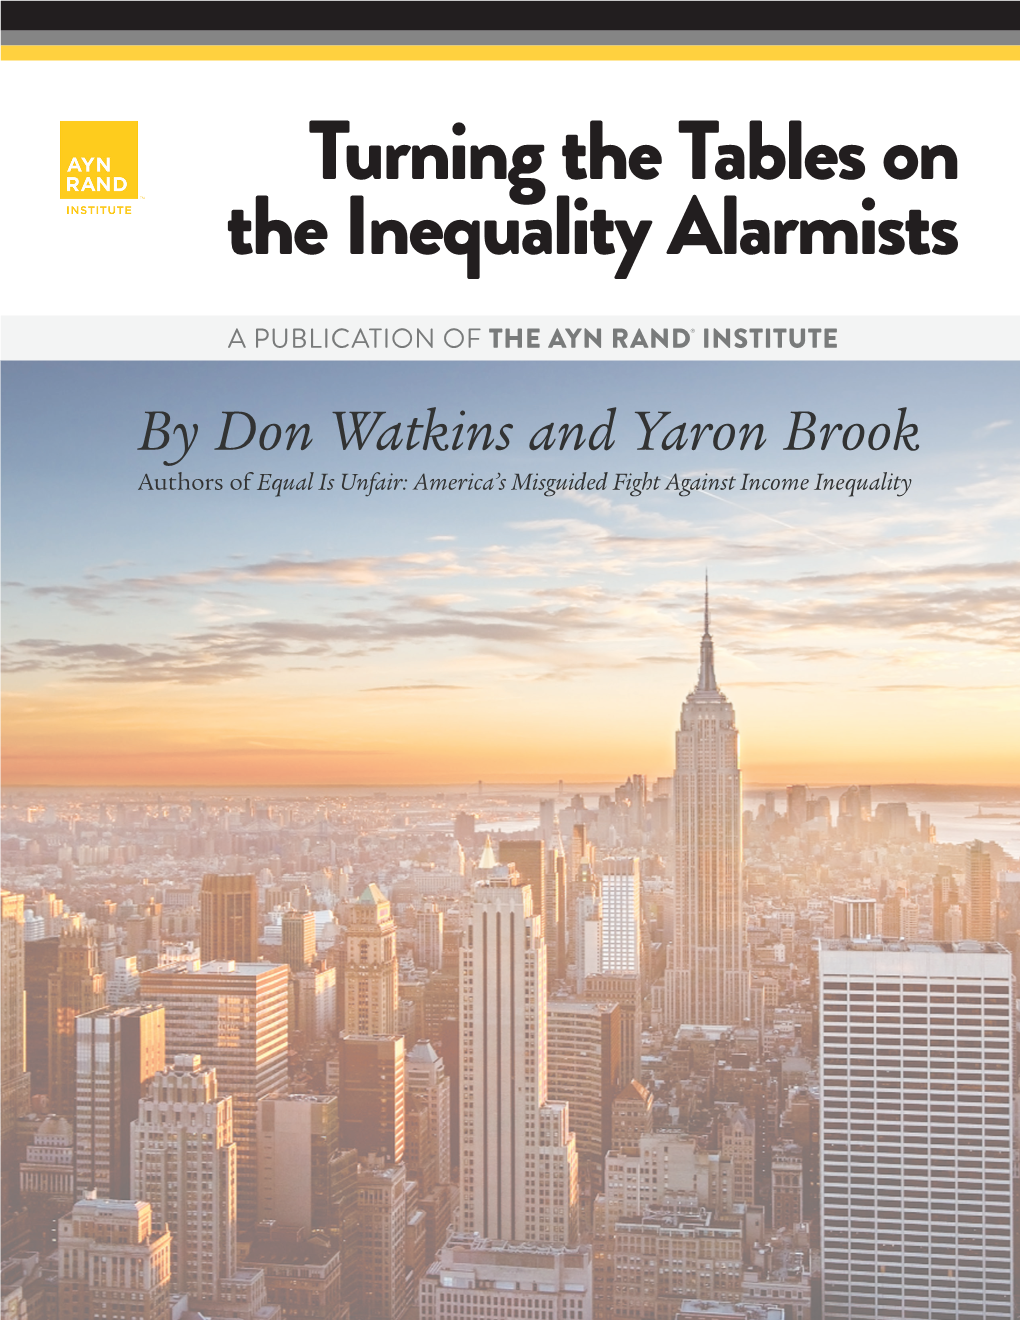 Turning the Tables on the Inequality Alarmists